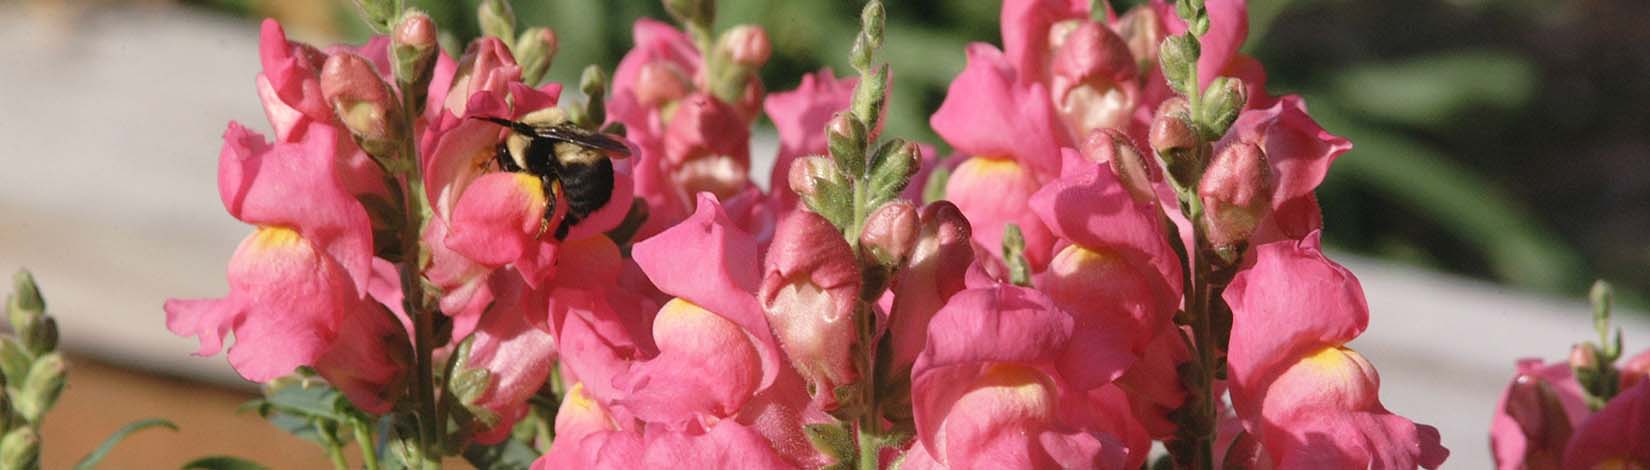 Snapdragons are good plants for cold weather